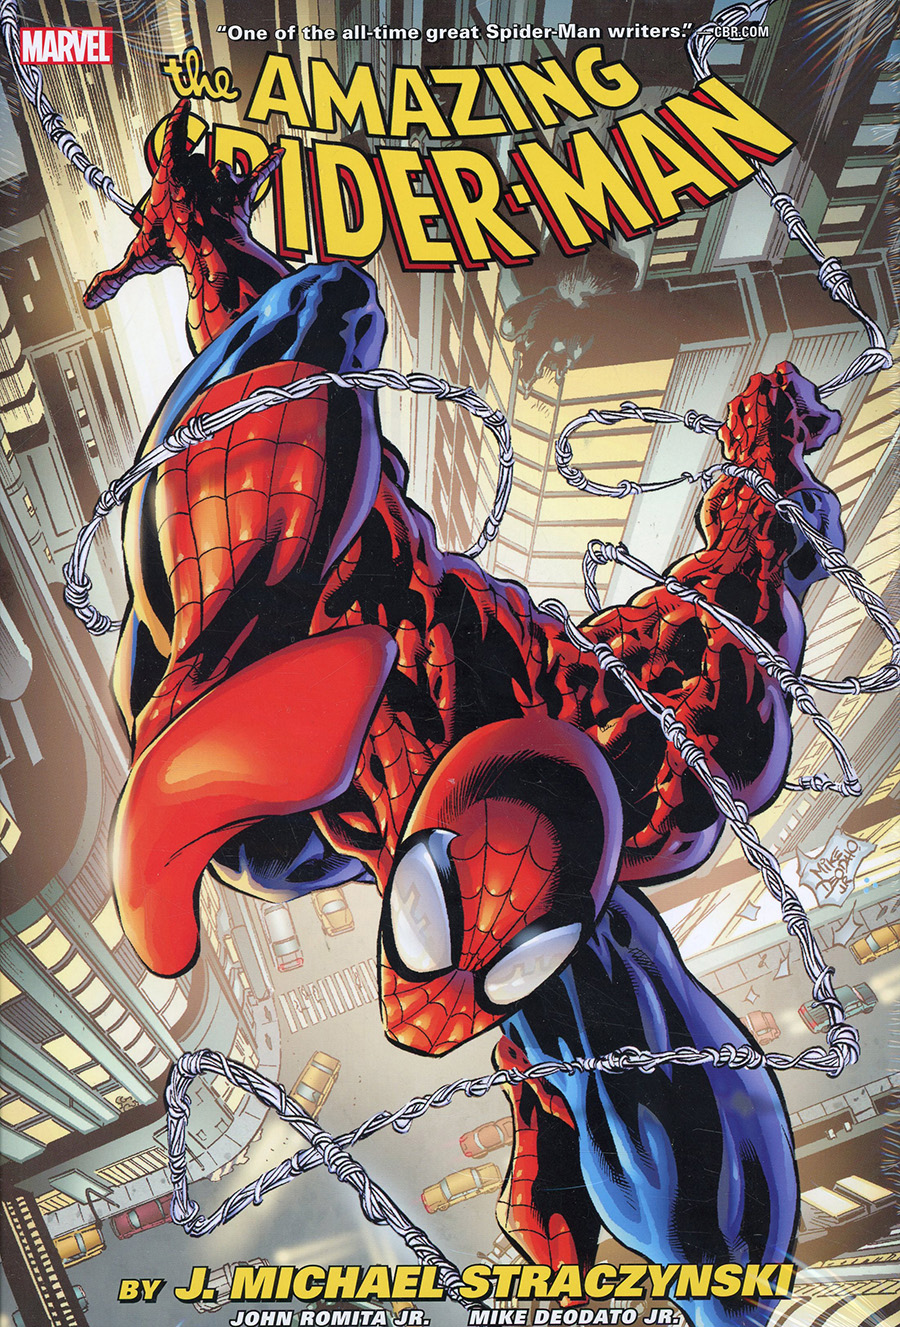 Amazing Spider-Man By J Michael Straczynski Omnibus Vol 1 HC Direct Market Mike Deodato Jr Variant Cover New Printing